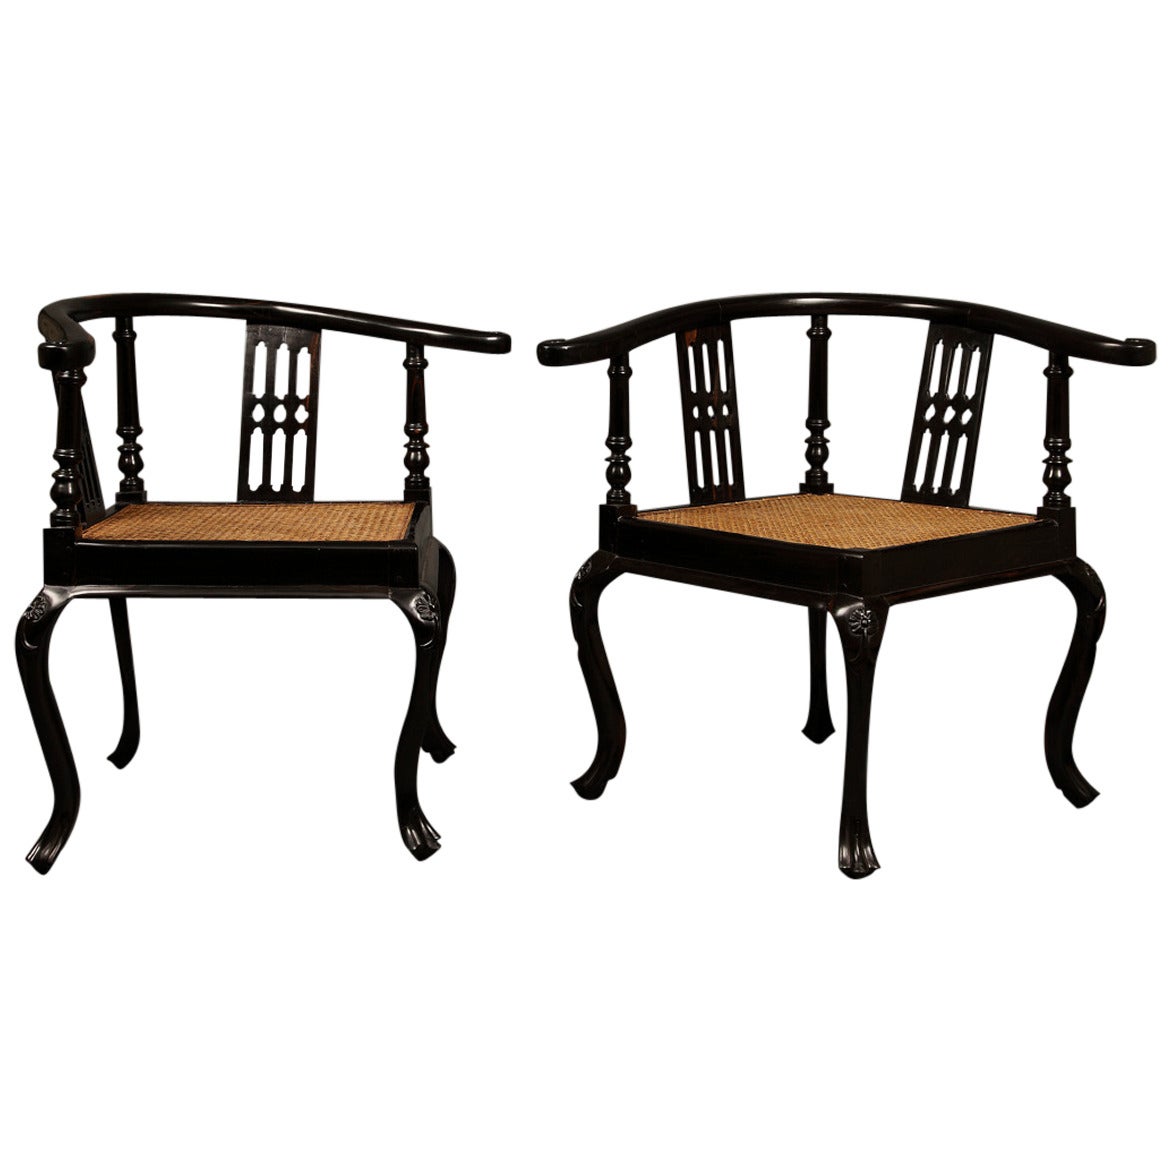 Pair of Ebony Corner Chairs For Sale